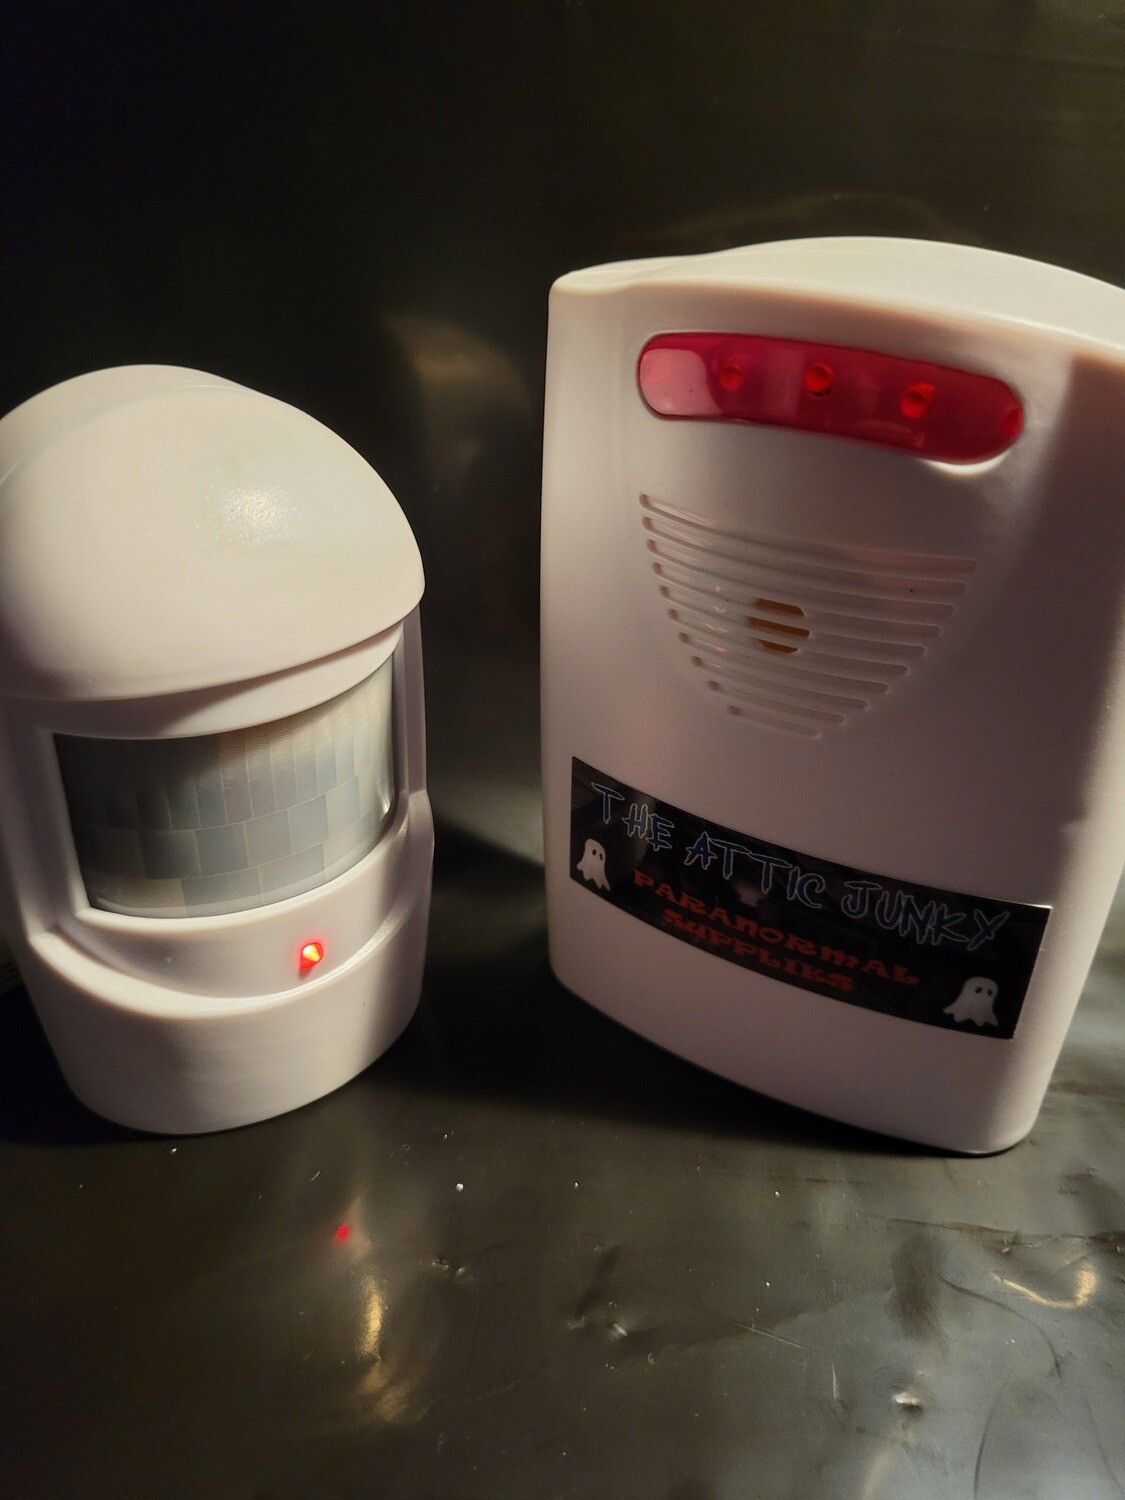 New Shadow Infared Motion Alert Alarm With Chime and 30ft Radius Reciever.